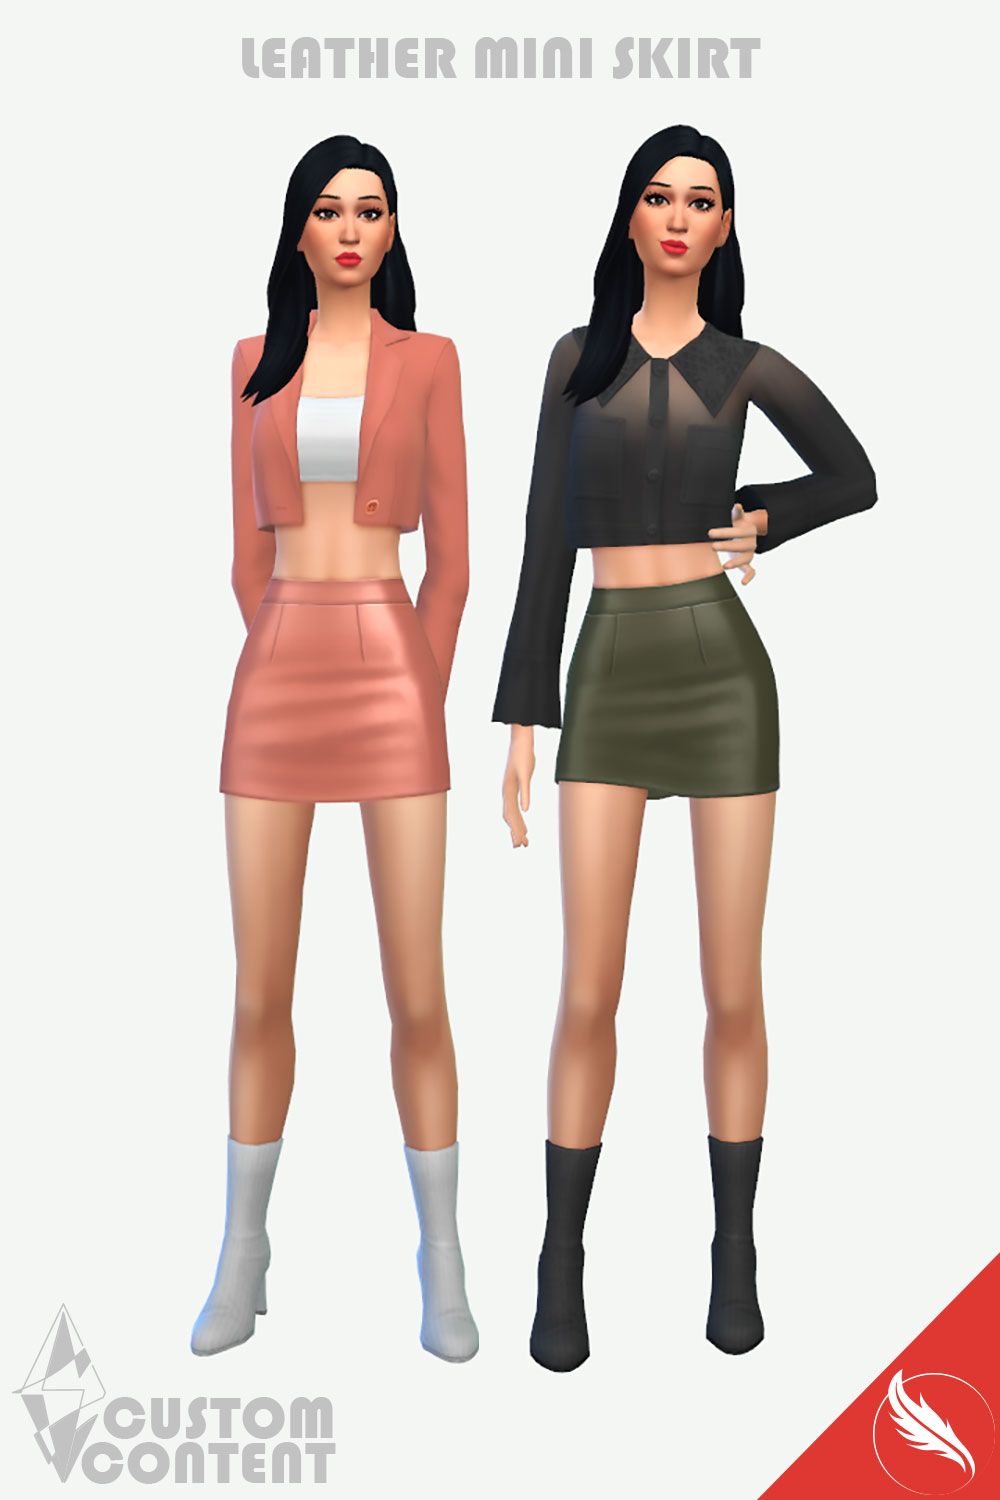 The Sims 4 Leather Mini Skirt